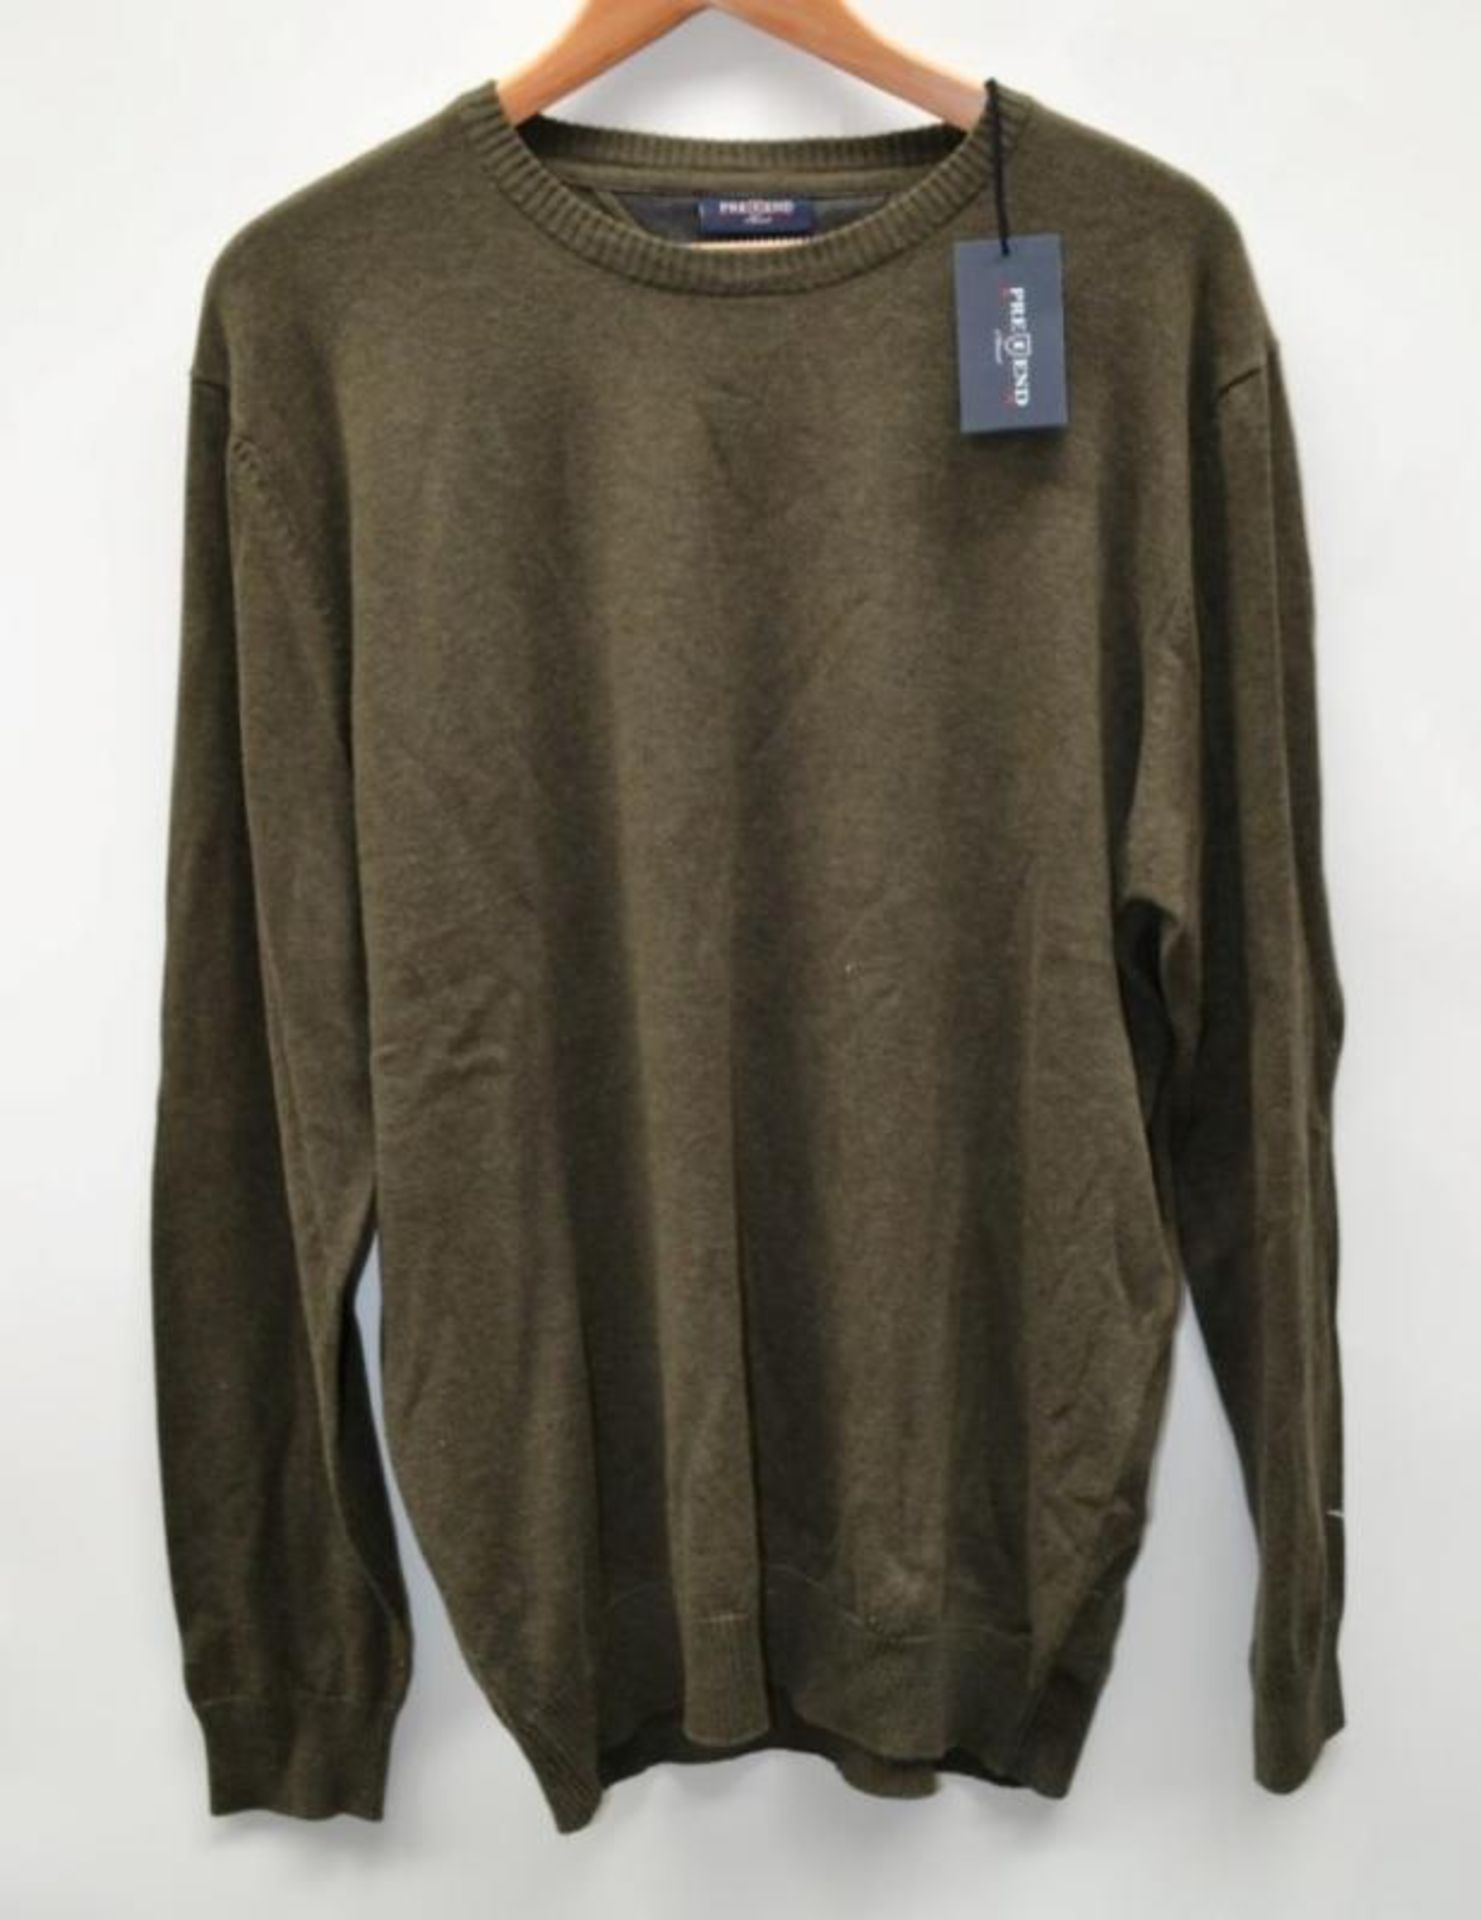 5 x Assorted Pre End Branded Mens Long Sleeve Knitware / Jumpers - New Stock With Tags - Recent - Image 5 of 7